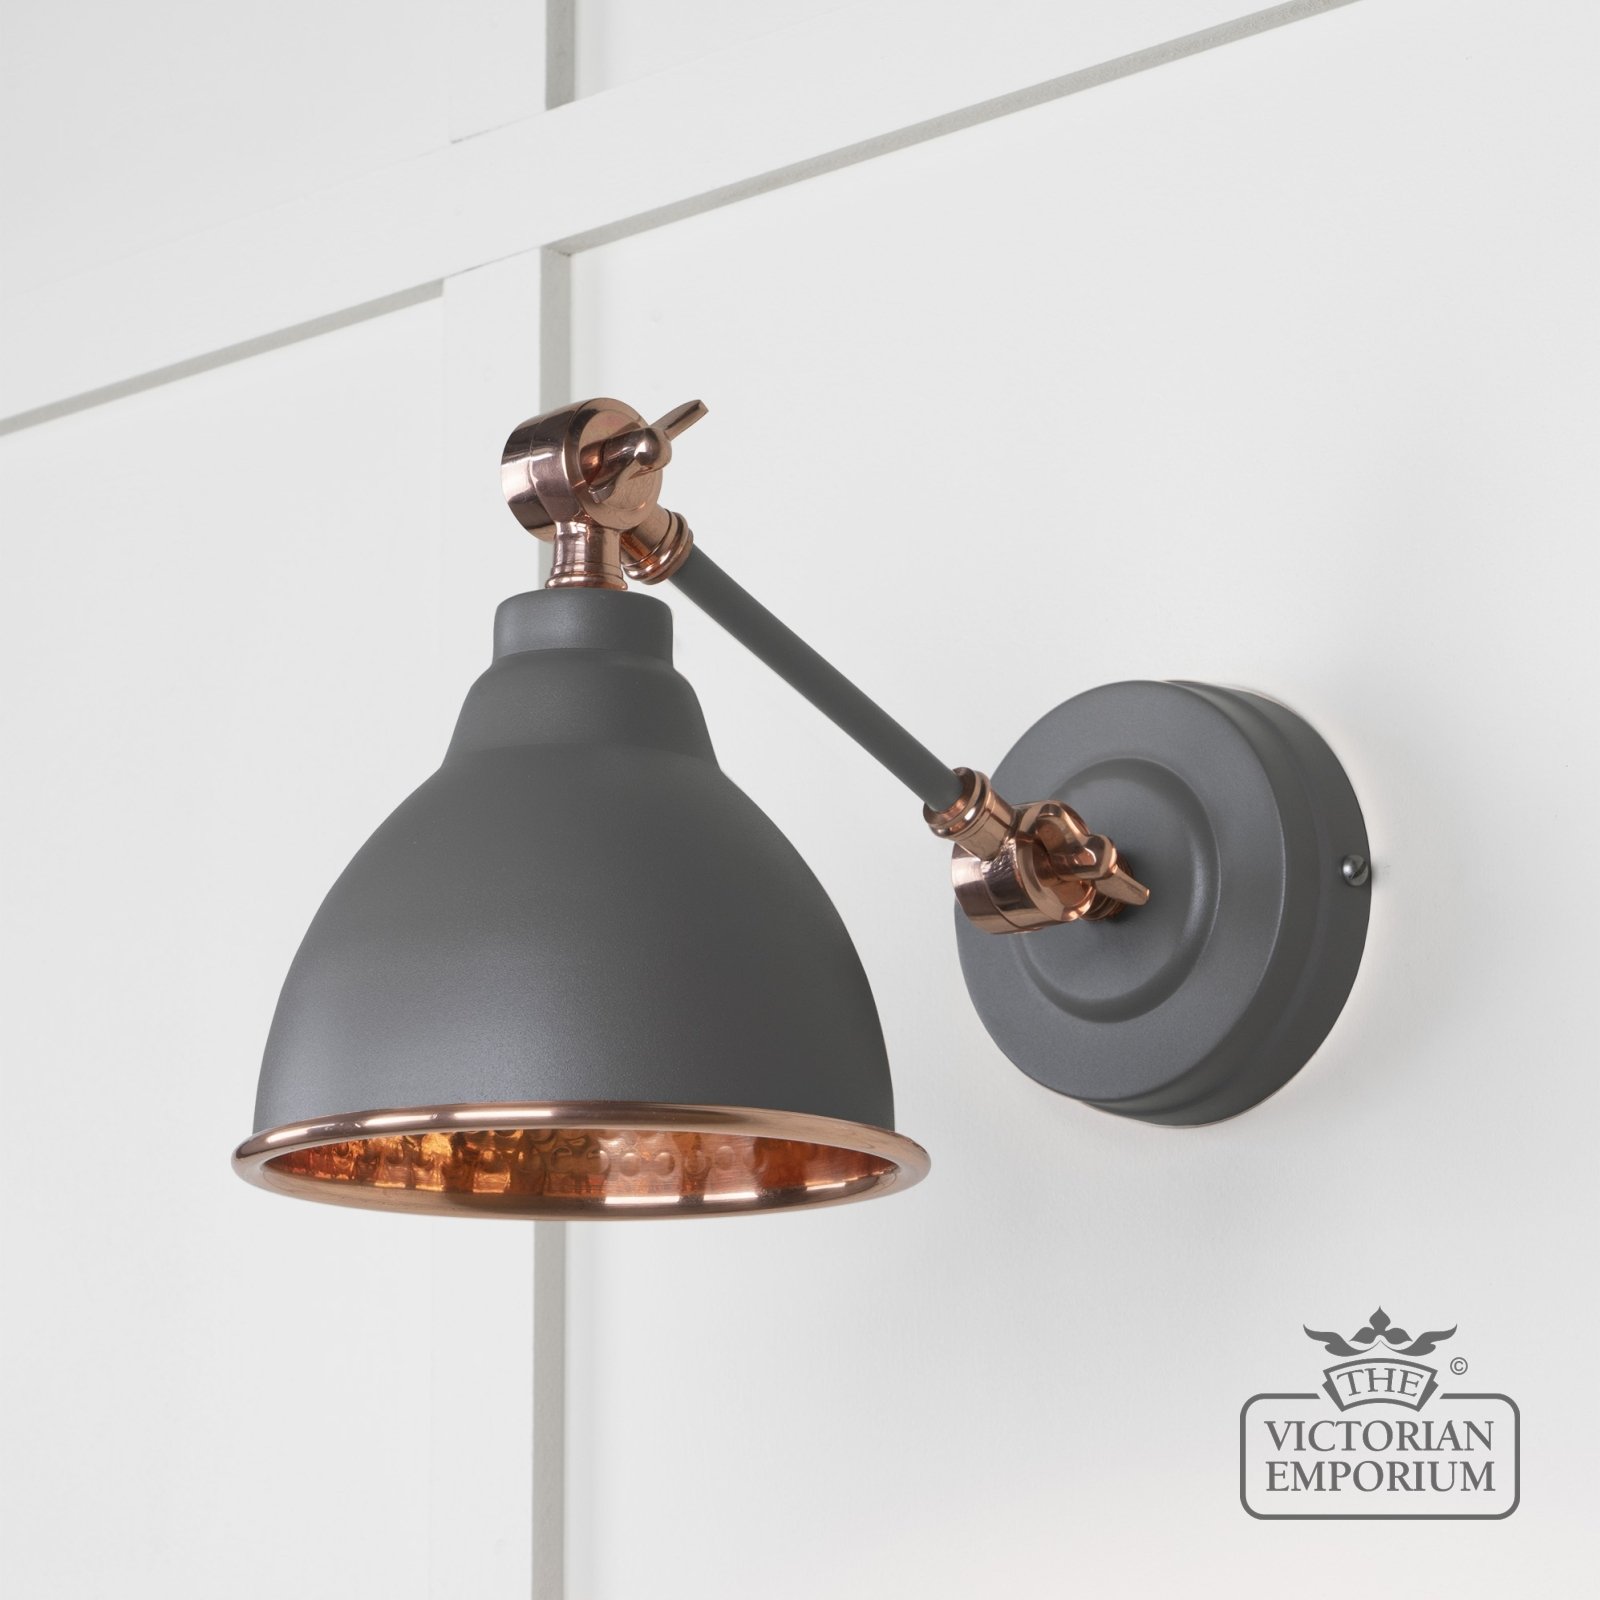 Brindle Wall Light with Hammered Copper Interior and Bluff Exterior